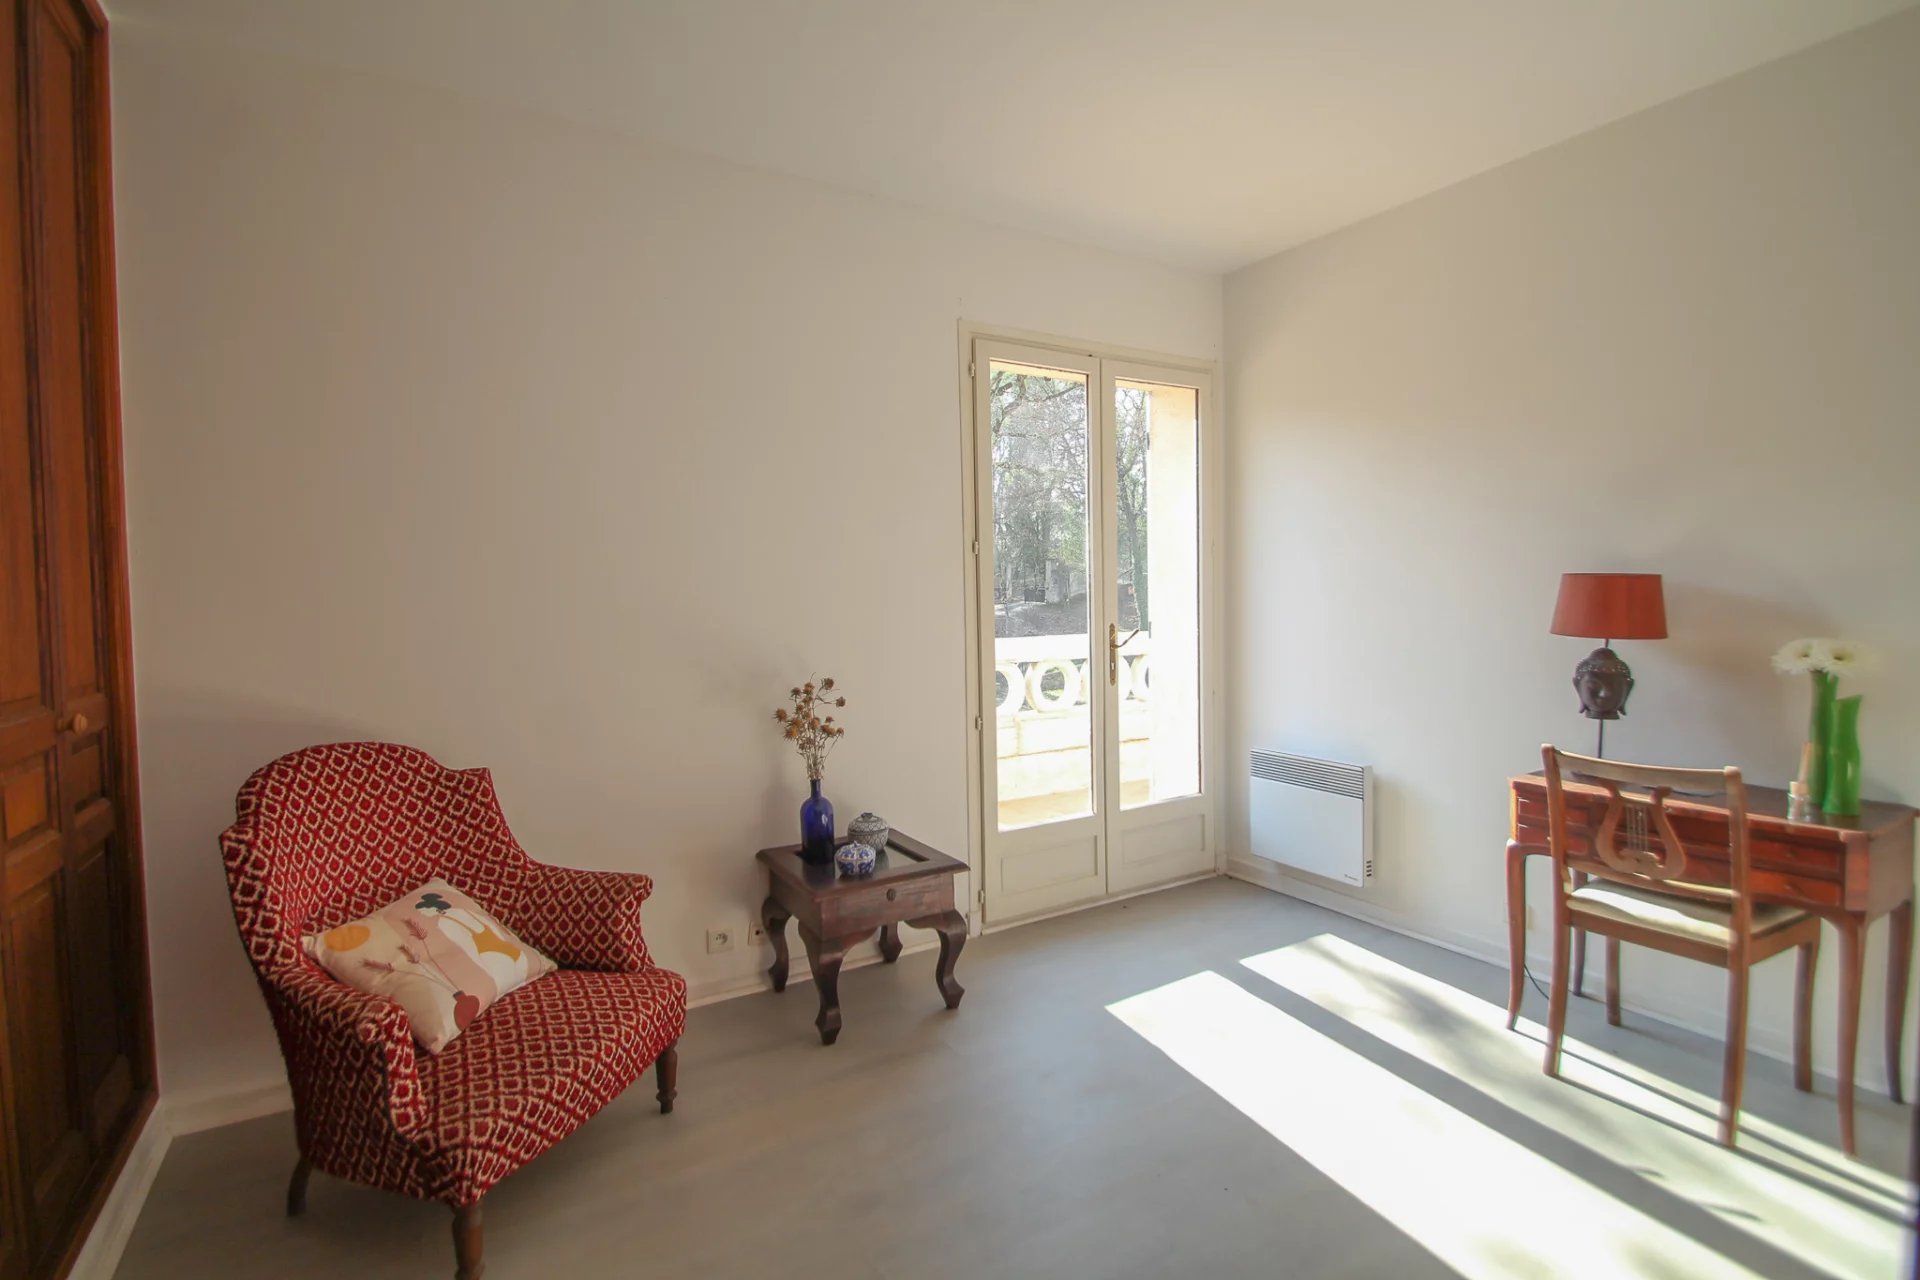 Fayence Countryside House situated in it's own park of 6200m² of land